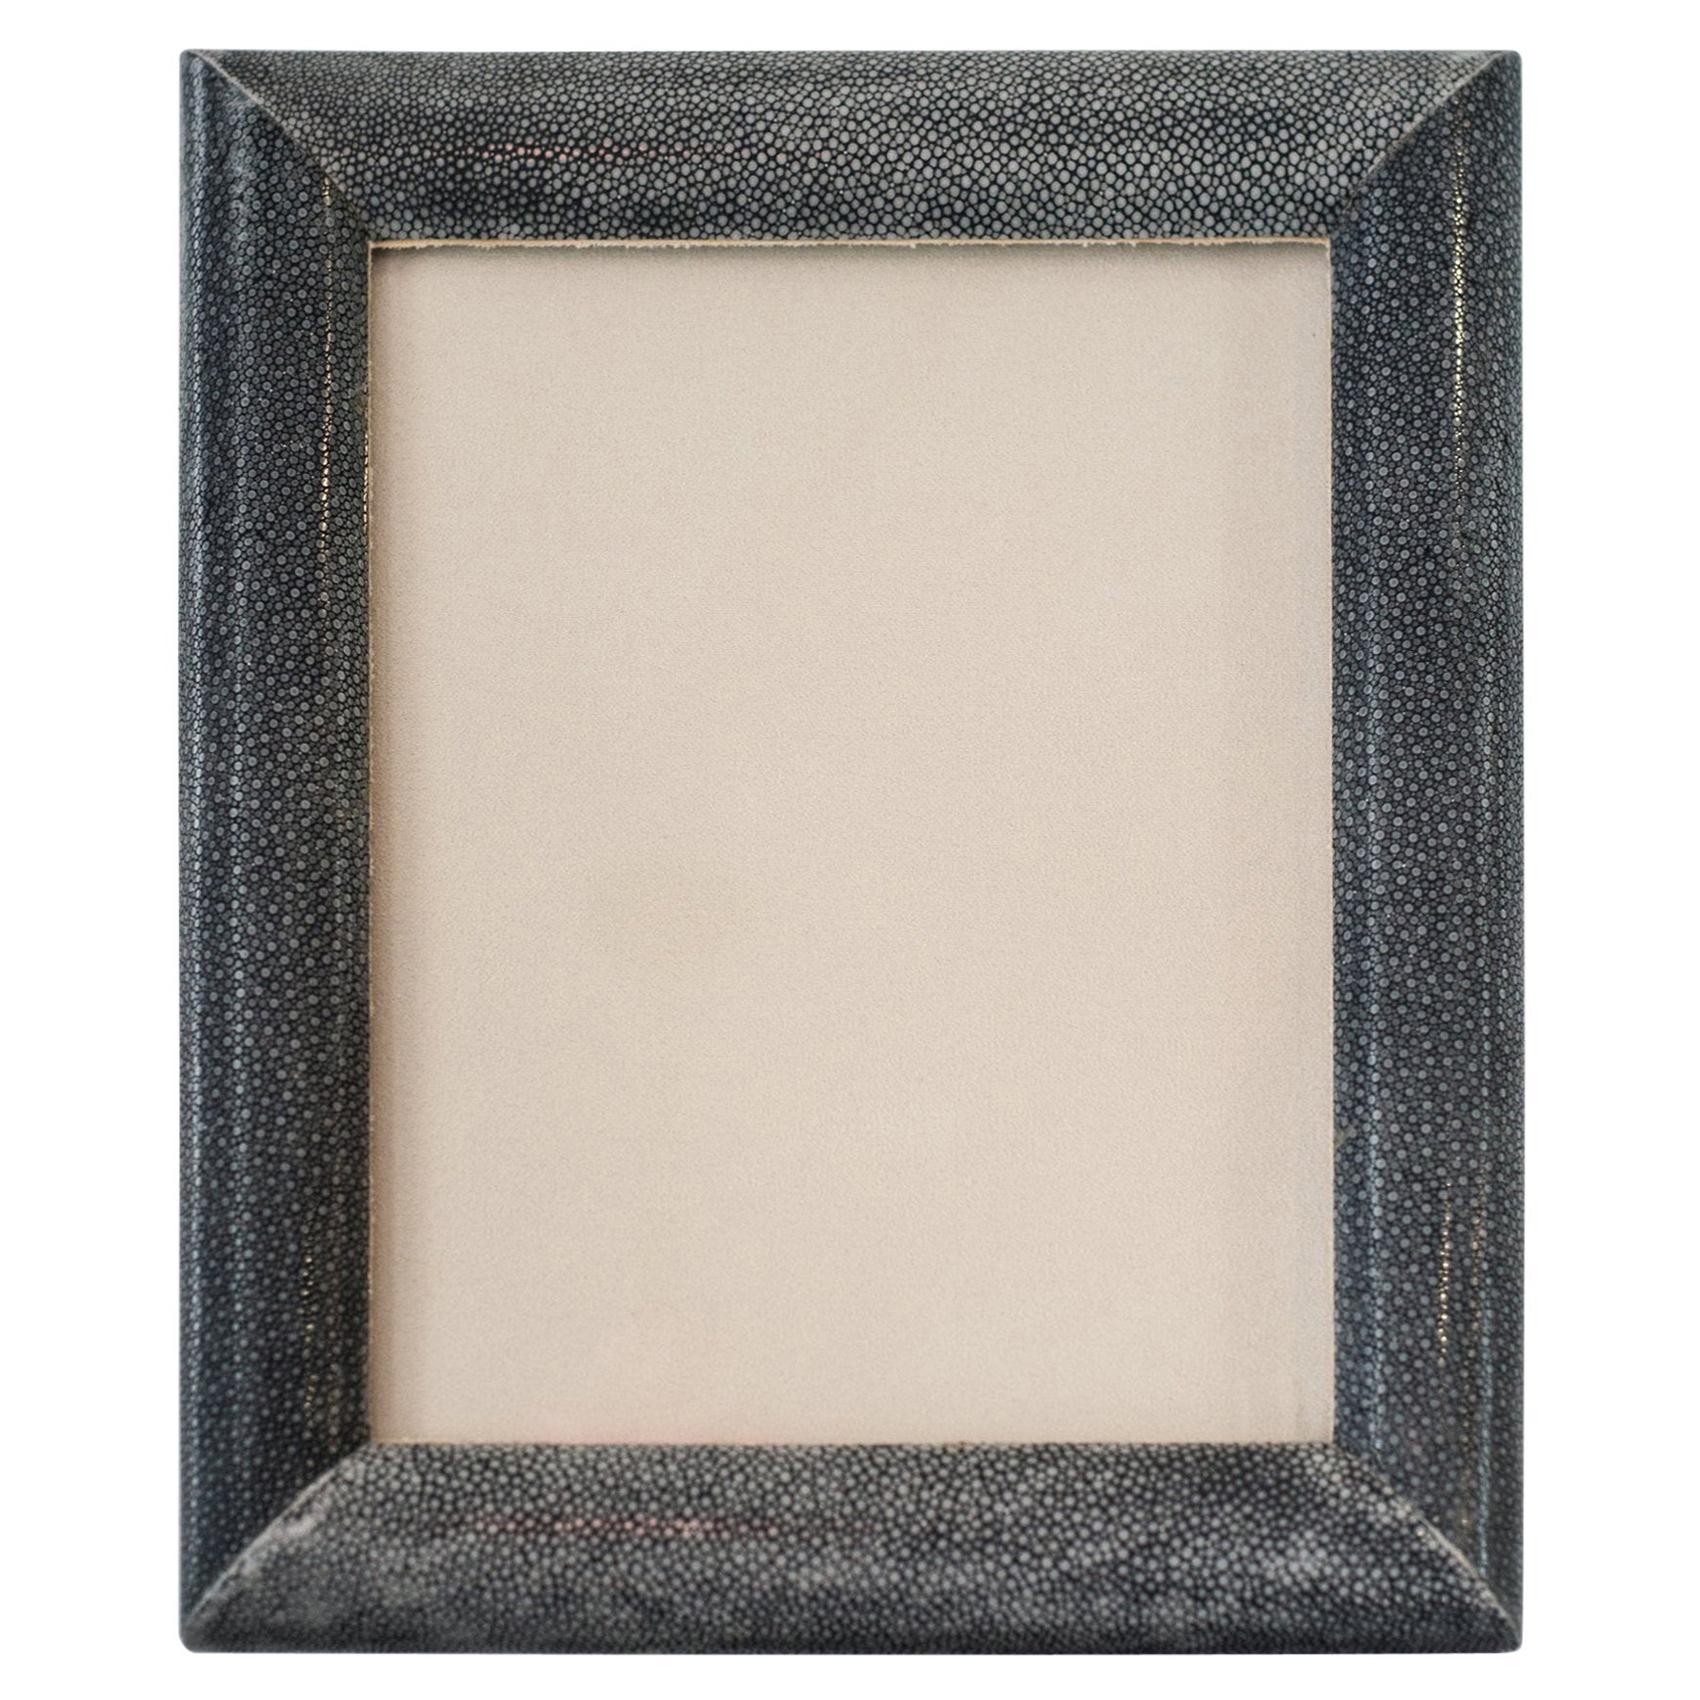 Large Blue/Black Authentic Shagreen Covered Picture Frame